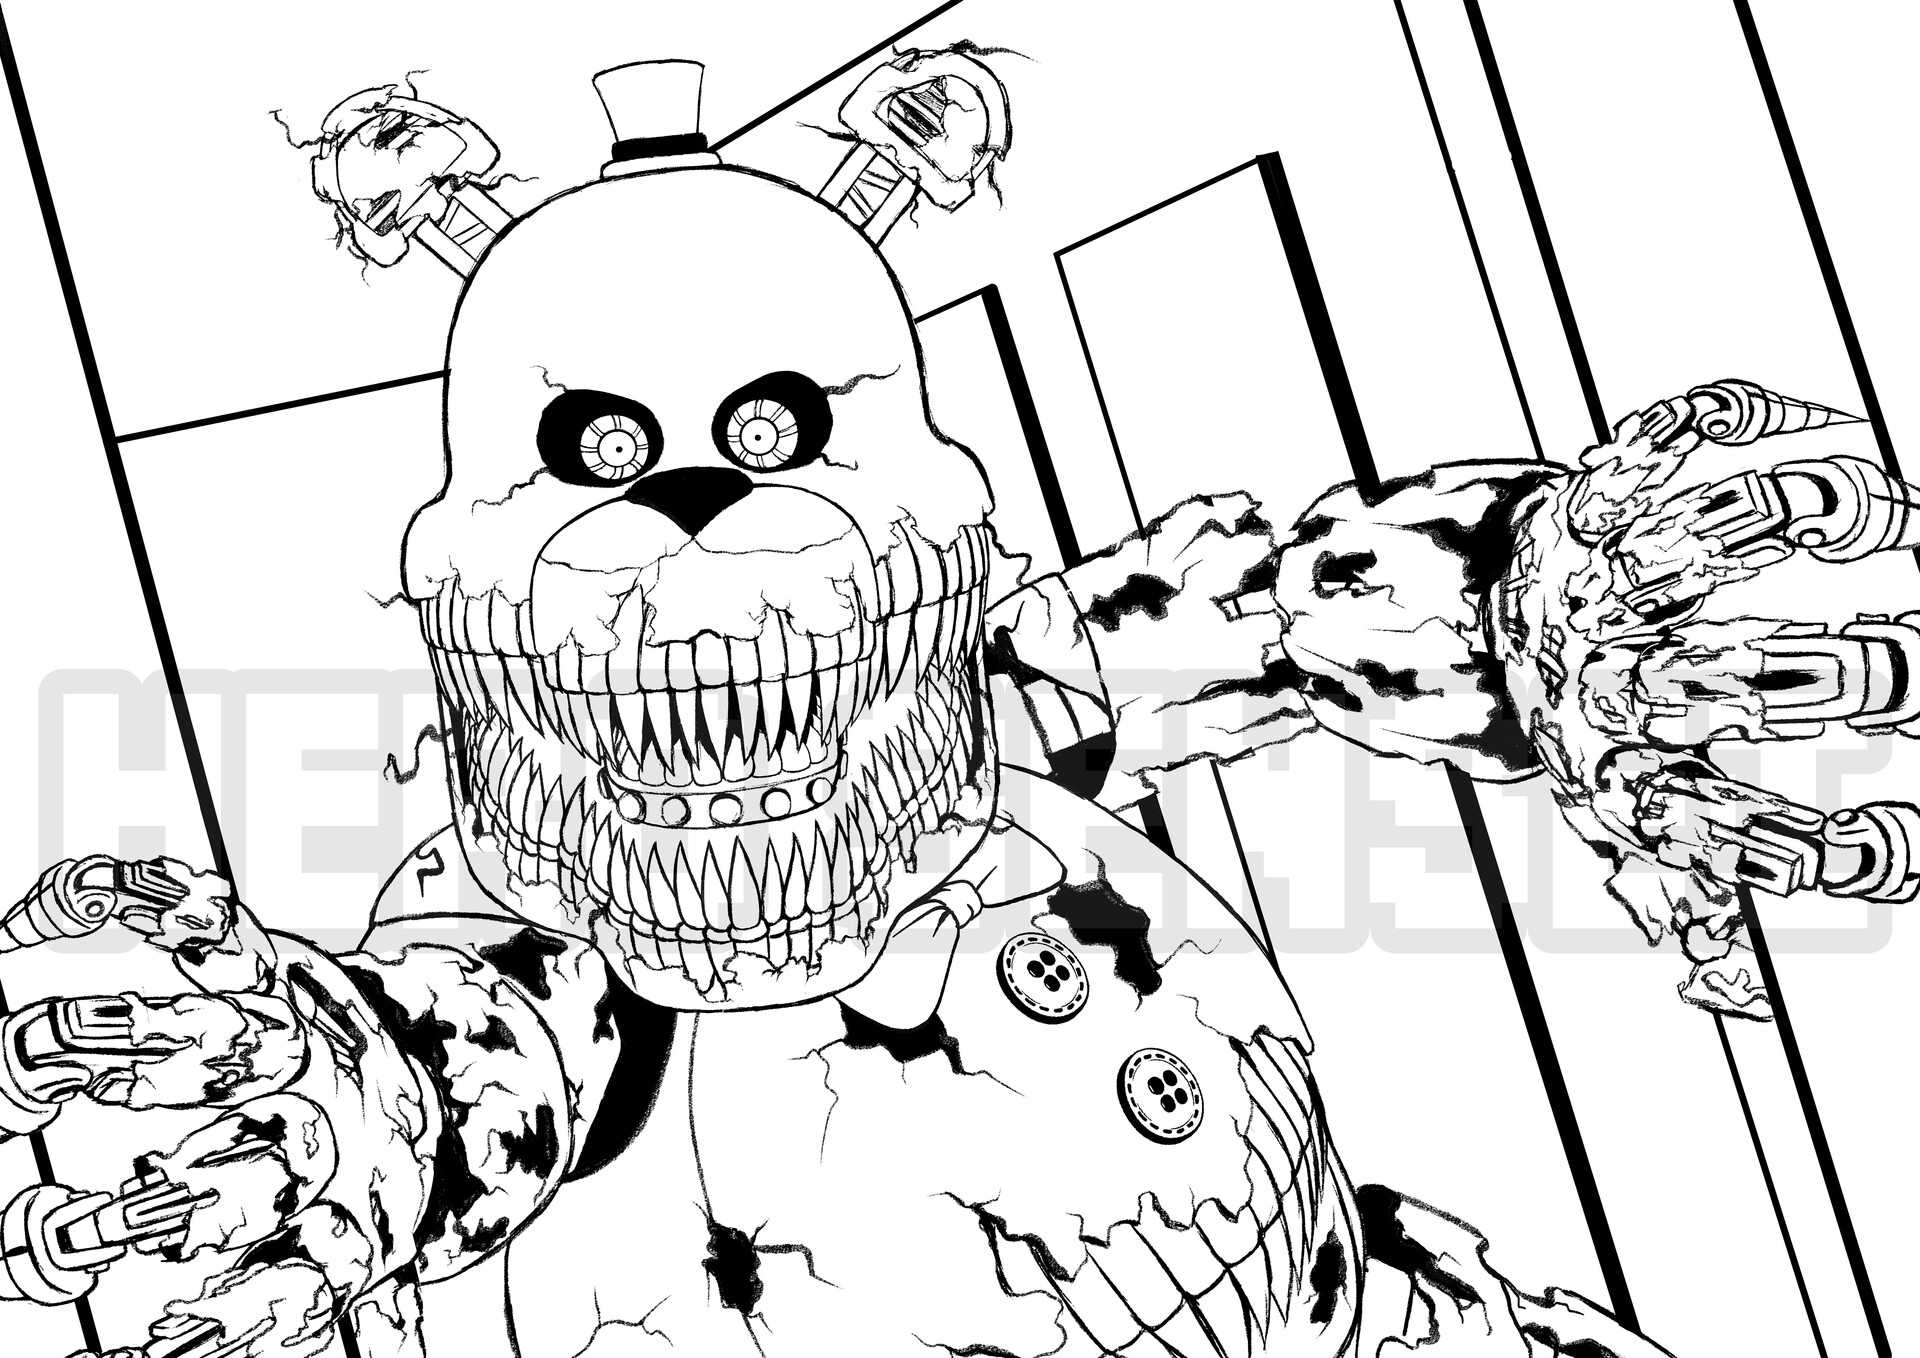 This is my fan-art drawing of Nightmare Fredbear from Five Nights at  Freddy's 4! Summer always makes me super nostalgic for FNaF4, especially  the hype leading up to it's release : r/fivenightsatfreddys